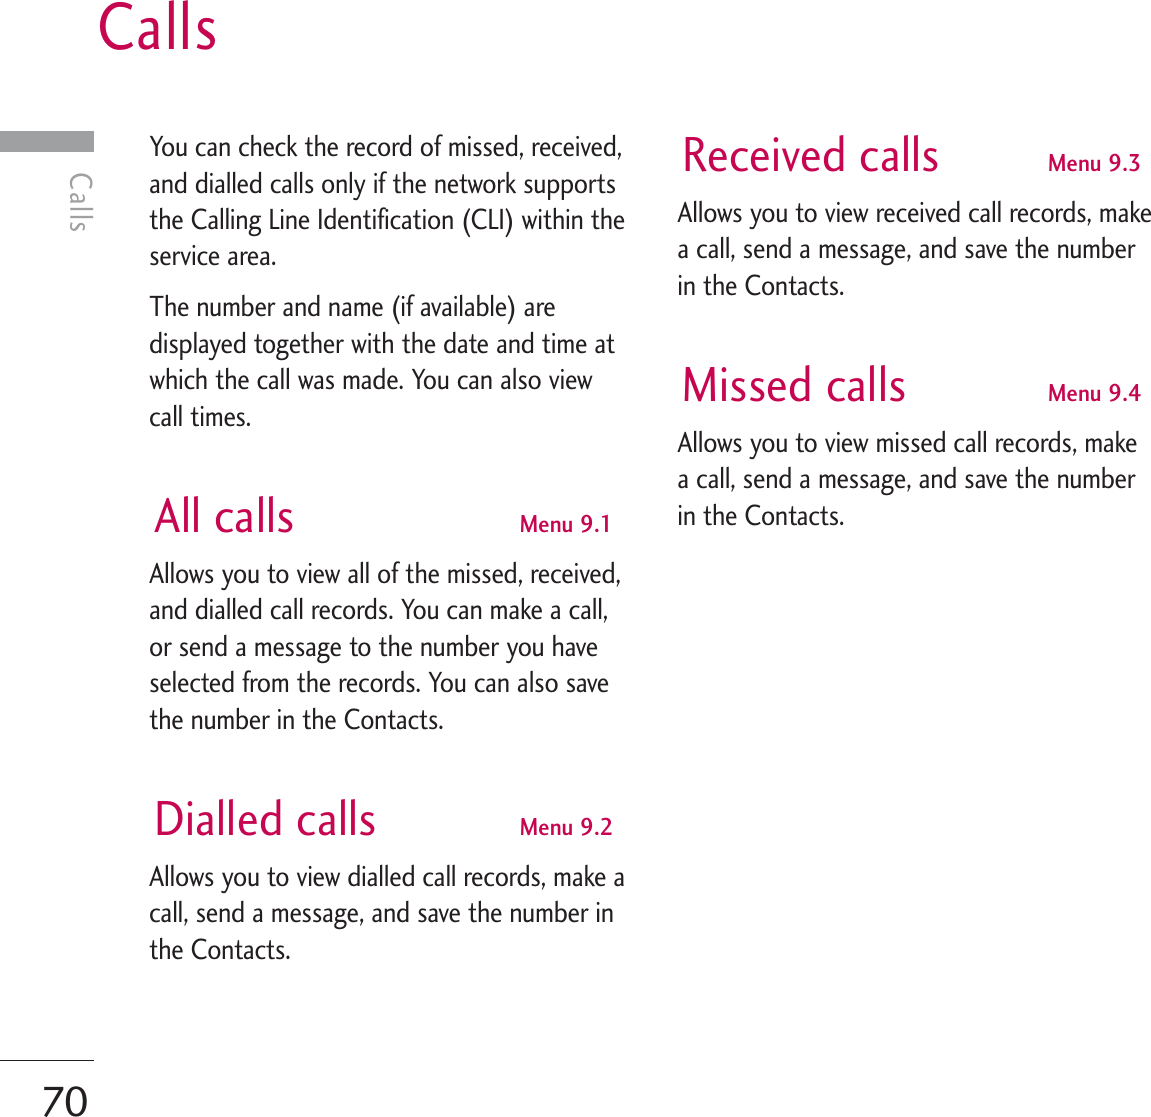 Calls70CallsYou can check the record of missed, received,and dialled calls only if the network supportsthe Calling Line Identification (CLI) within theservice area.The number and name (if available) aredisplayed together with the date and time atwhich the call was made. You can also viewcall times.All calls Menu 9.1Allows you to view all of the missed, received,and dialled call records. You can make a call,or send a message to the number you haveselected from the records. You can also savethe number in the Contacts.Dialled calls Menu 9.2Allows you to view dialled call records, make acall, send a message, and save the number inthe Contacts.Received calls Menu 9.3Allows you to view received call records, makea call, send a message, and save the numberin the Contacts.Missed calls Menu 9.4Allows you to view missed call records, makea call, send a message, and save the numberin the Contacts.